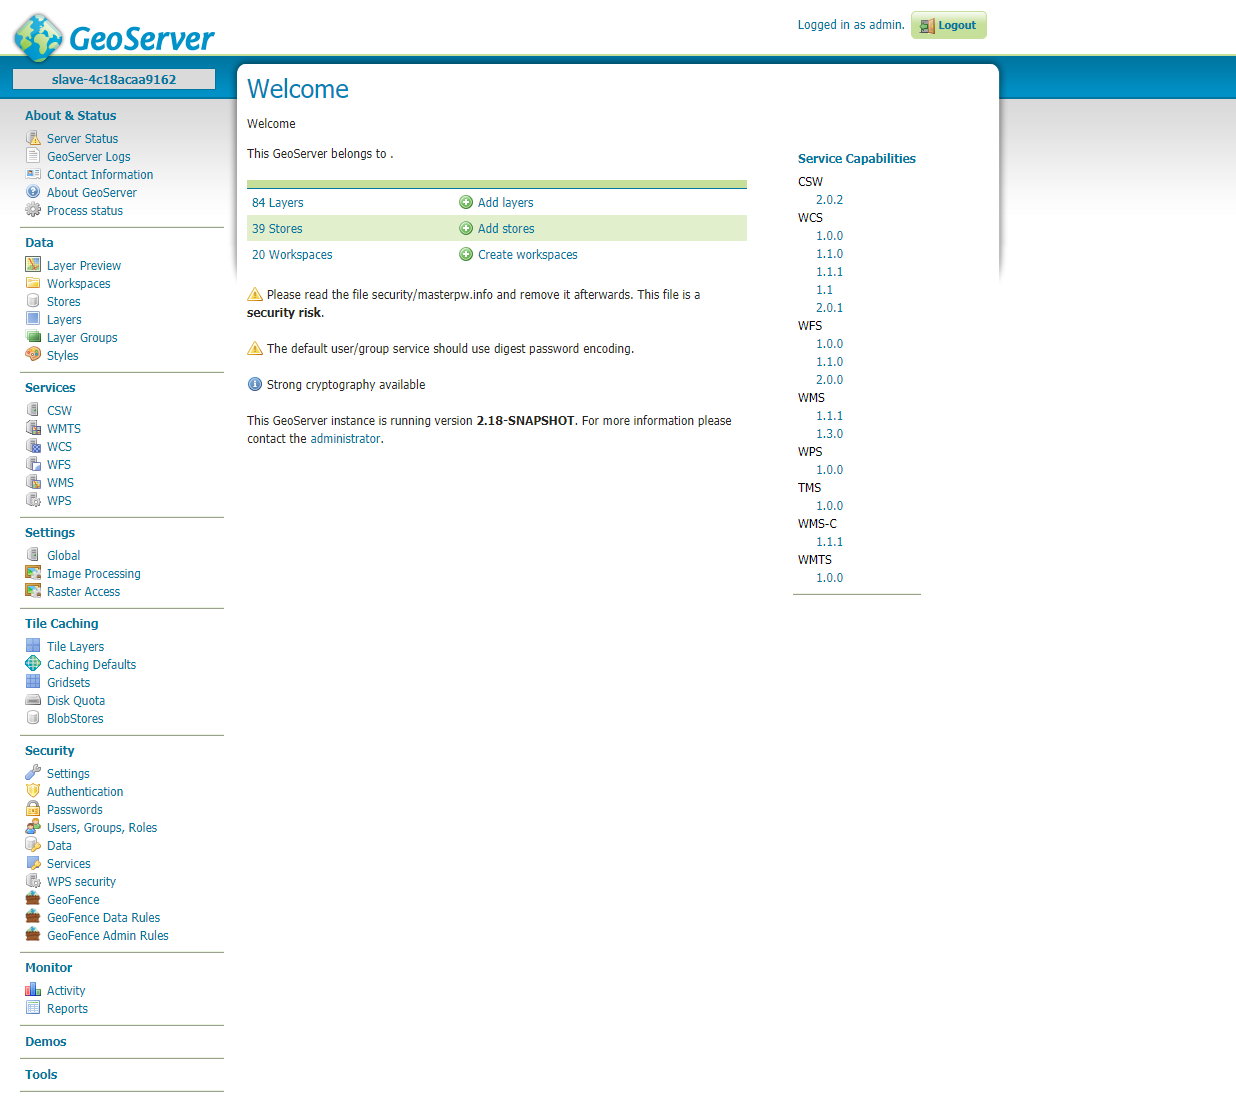 GeoServer Administration User Interface